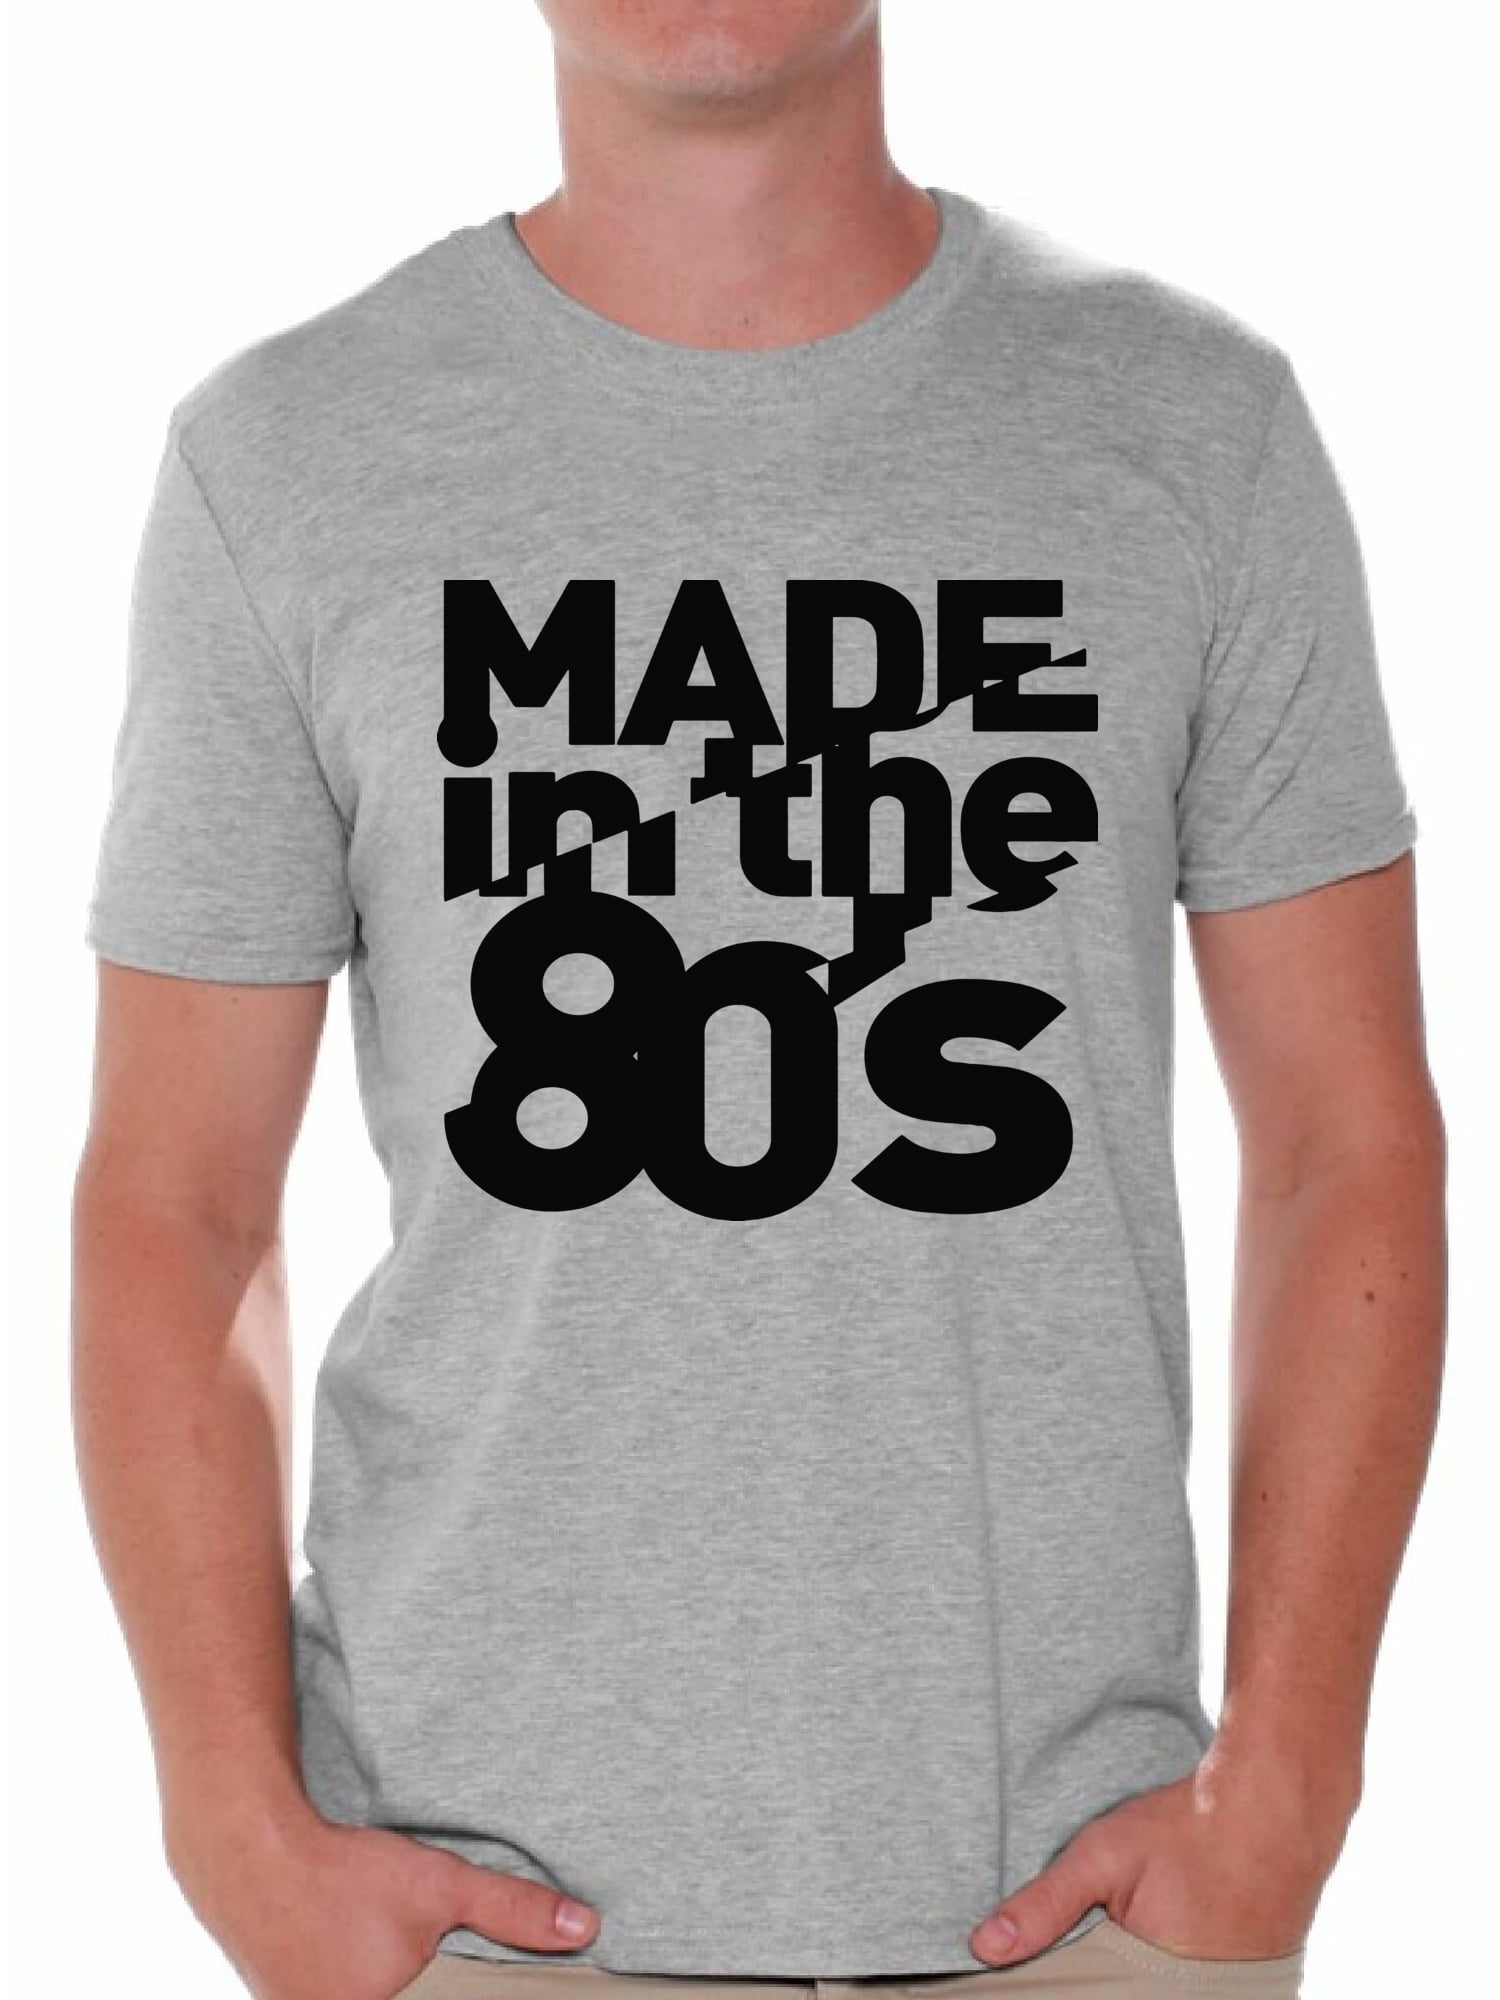 deres Gud Goneryl Awkward Styles Made in 80s Shirt 80s T Shirt 80s Birthday Shirt Mens 80s  Accessories Retro Vintage Rock Concert T-Shirt 80s Costume 80s Clothes for  Men 80s Outfit 80s Party - Walmart.com